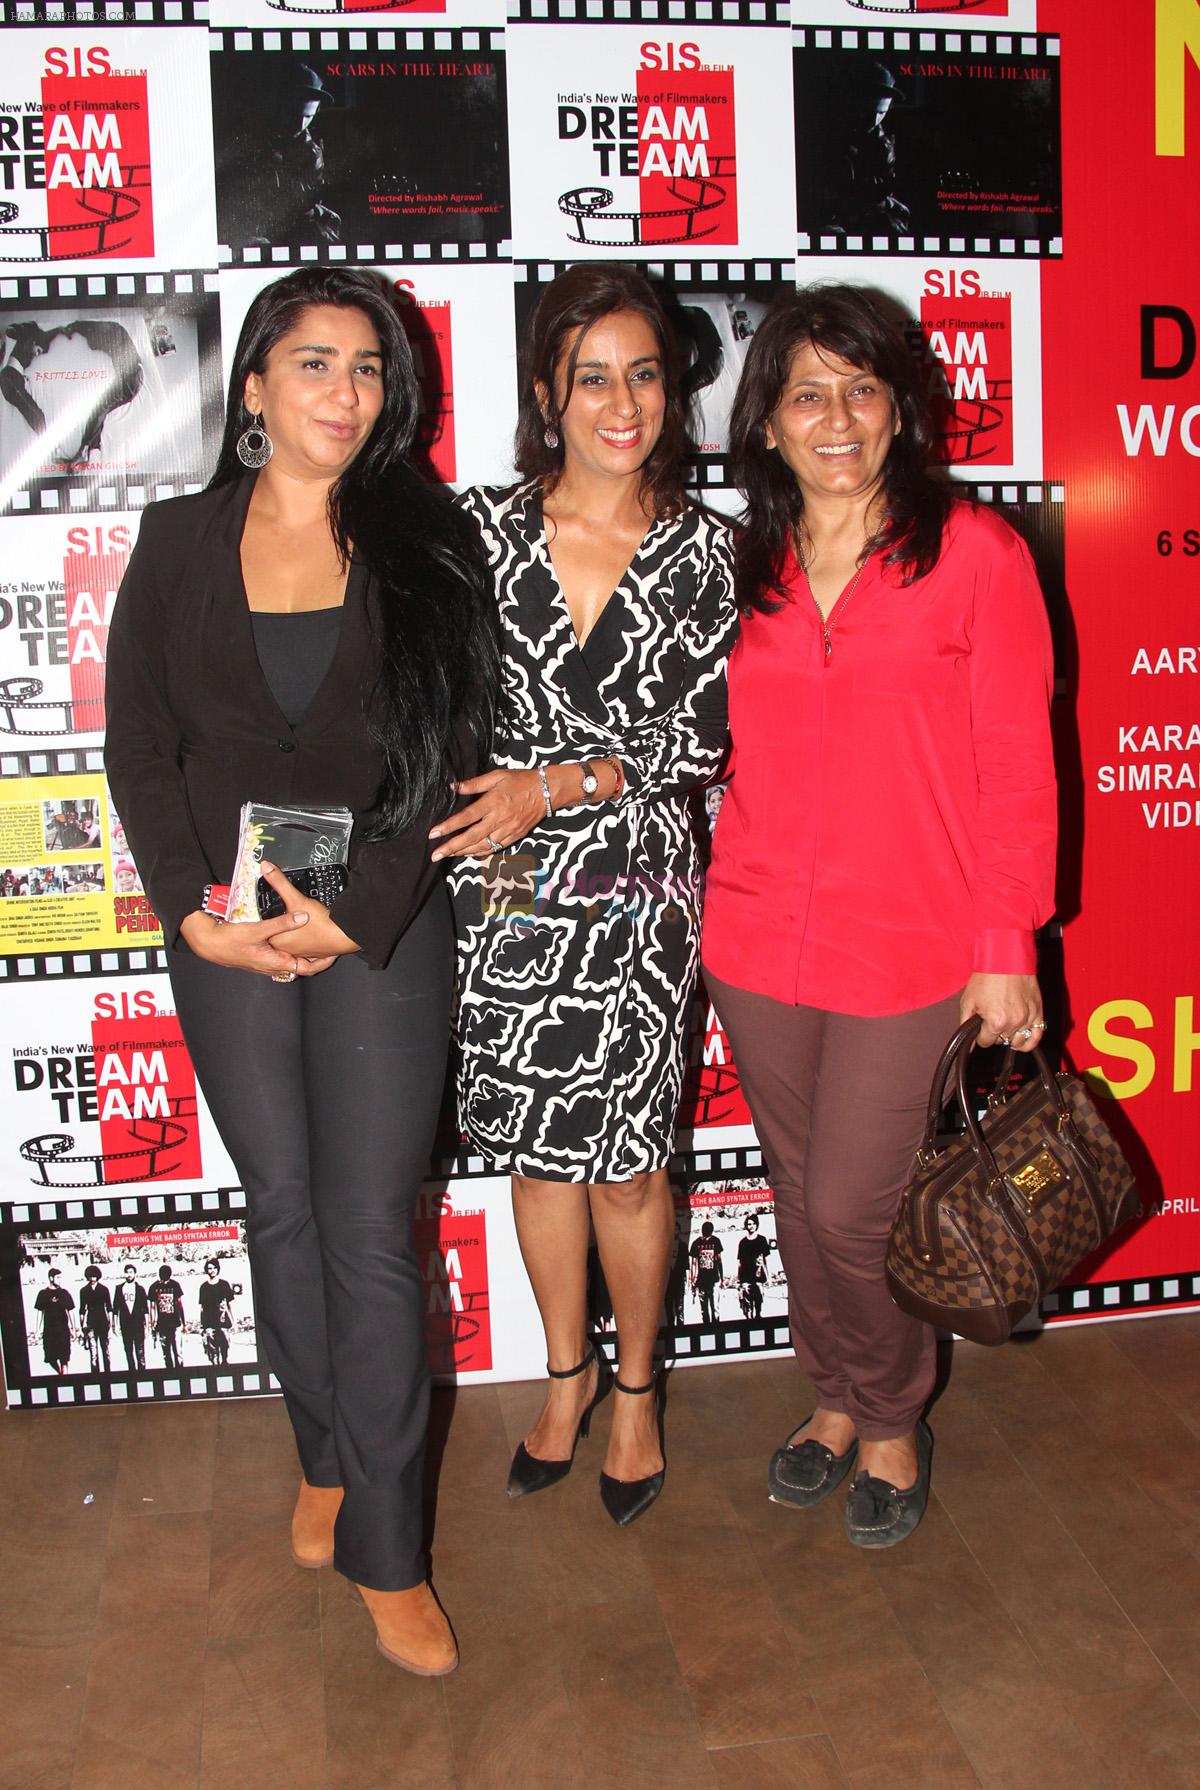 Proud mothers Sherley Singh, Deeya Singh and Archana Puran Singh at the premiere of films made by their kids